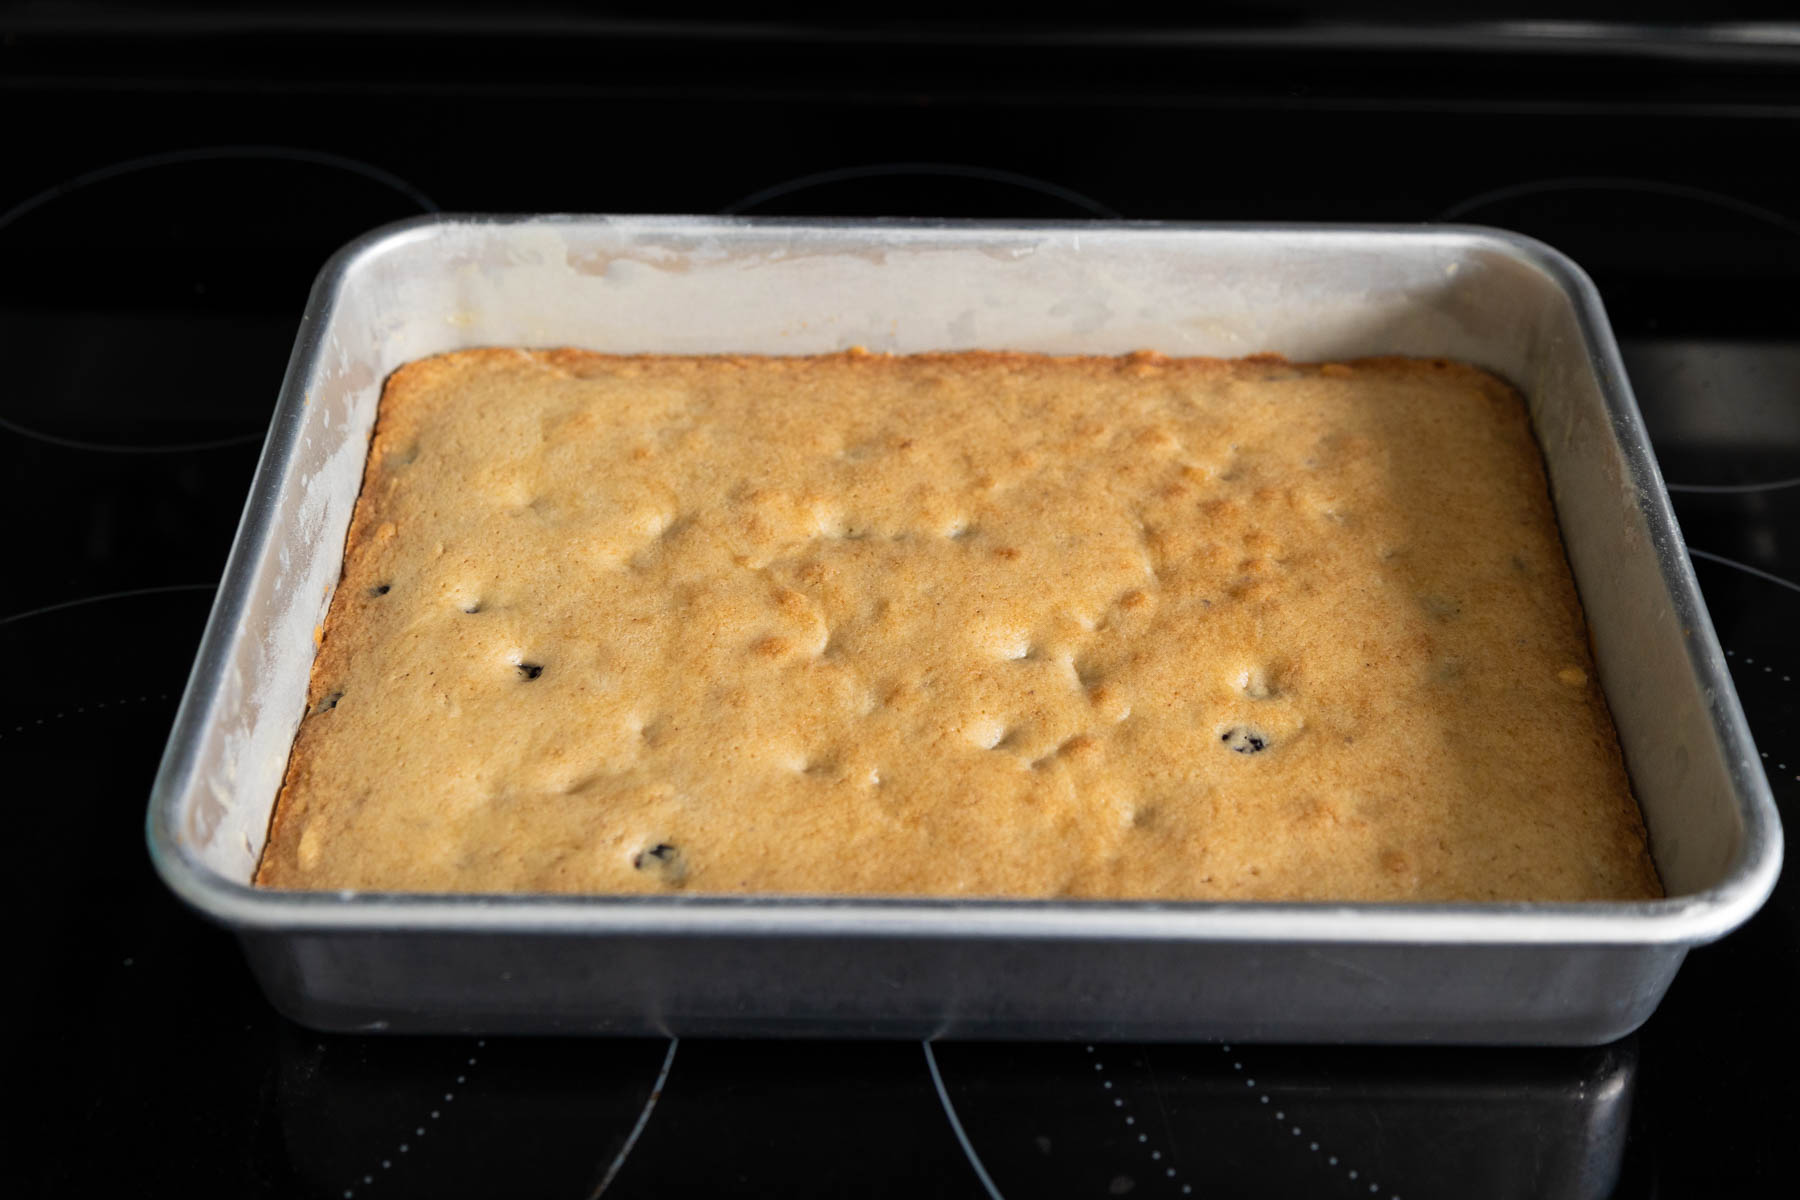 The baked cookie dough bars are just out of the oven, the top is golden brown.